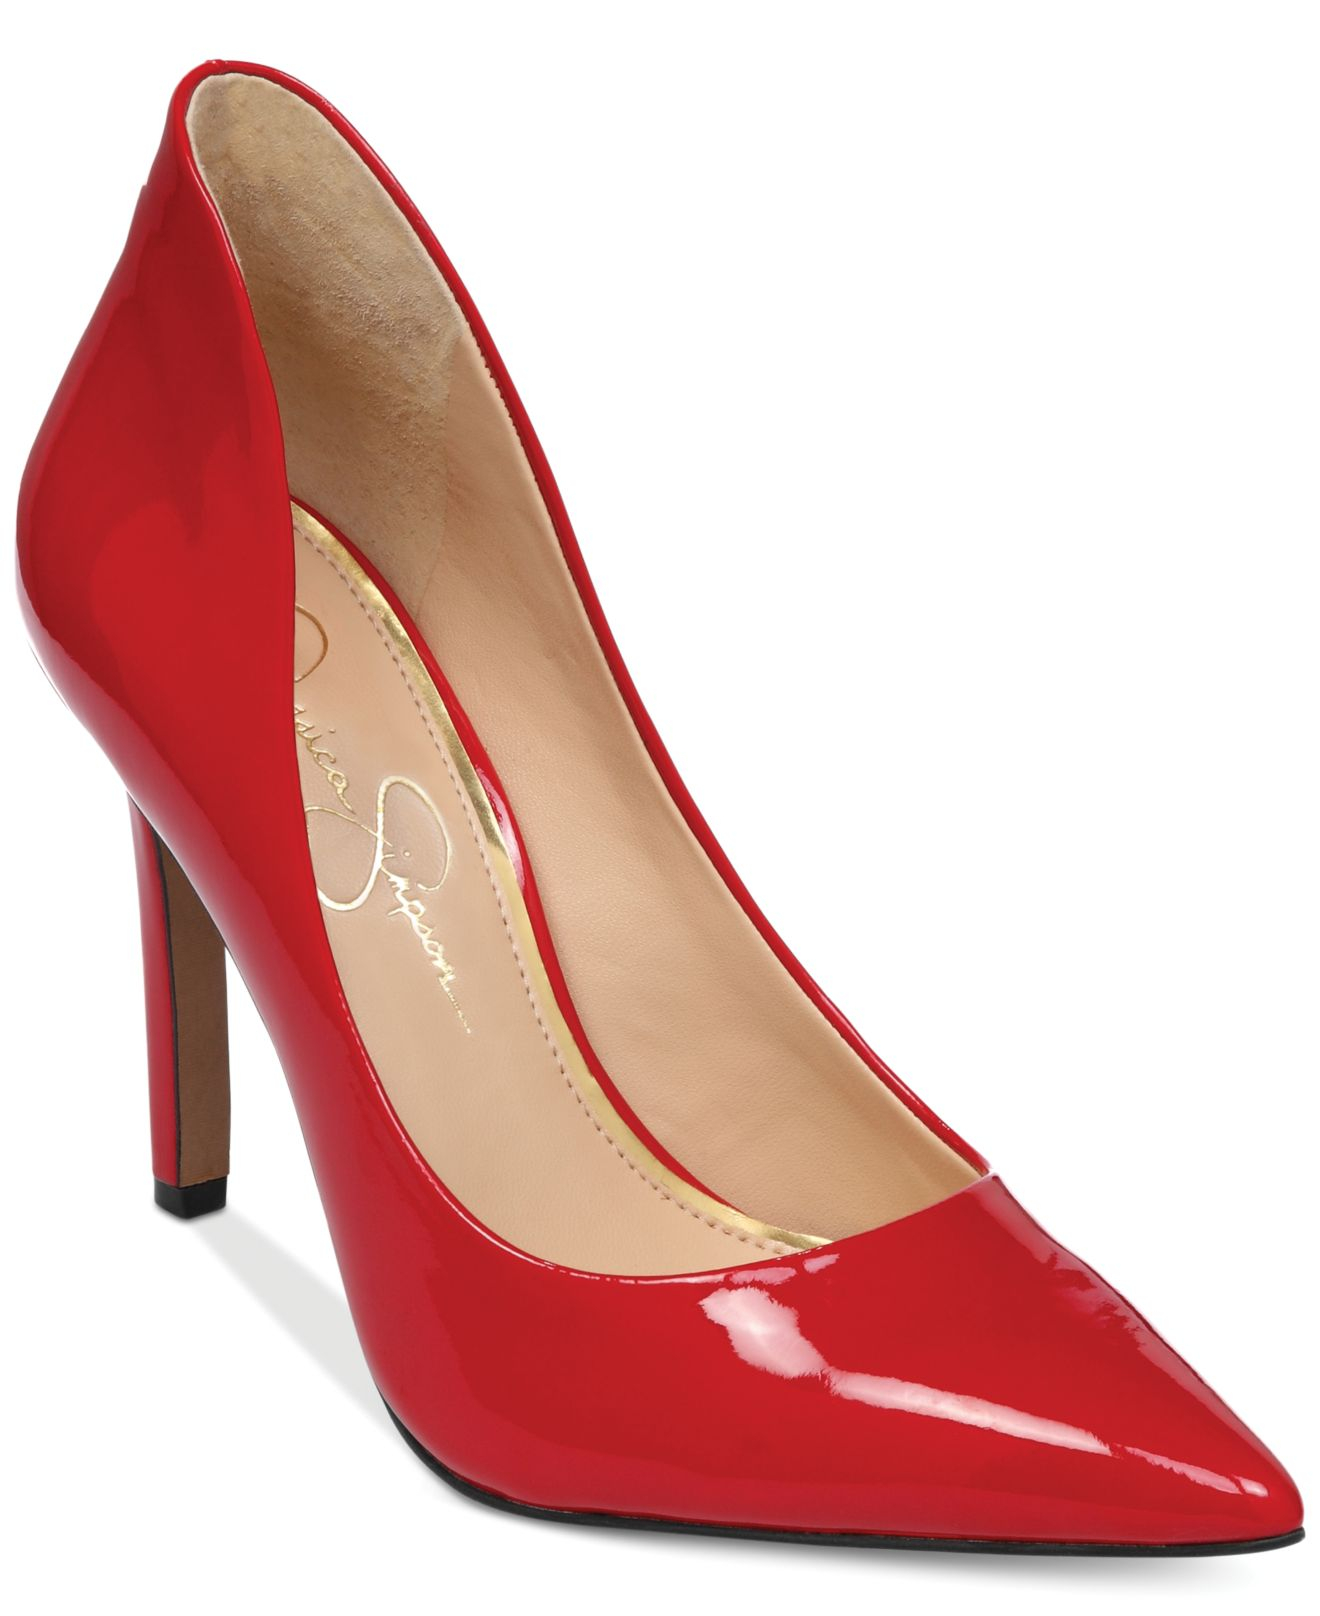 jessica simpson red patent leather pumps